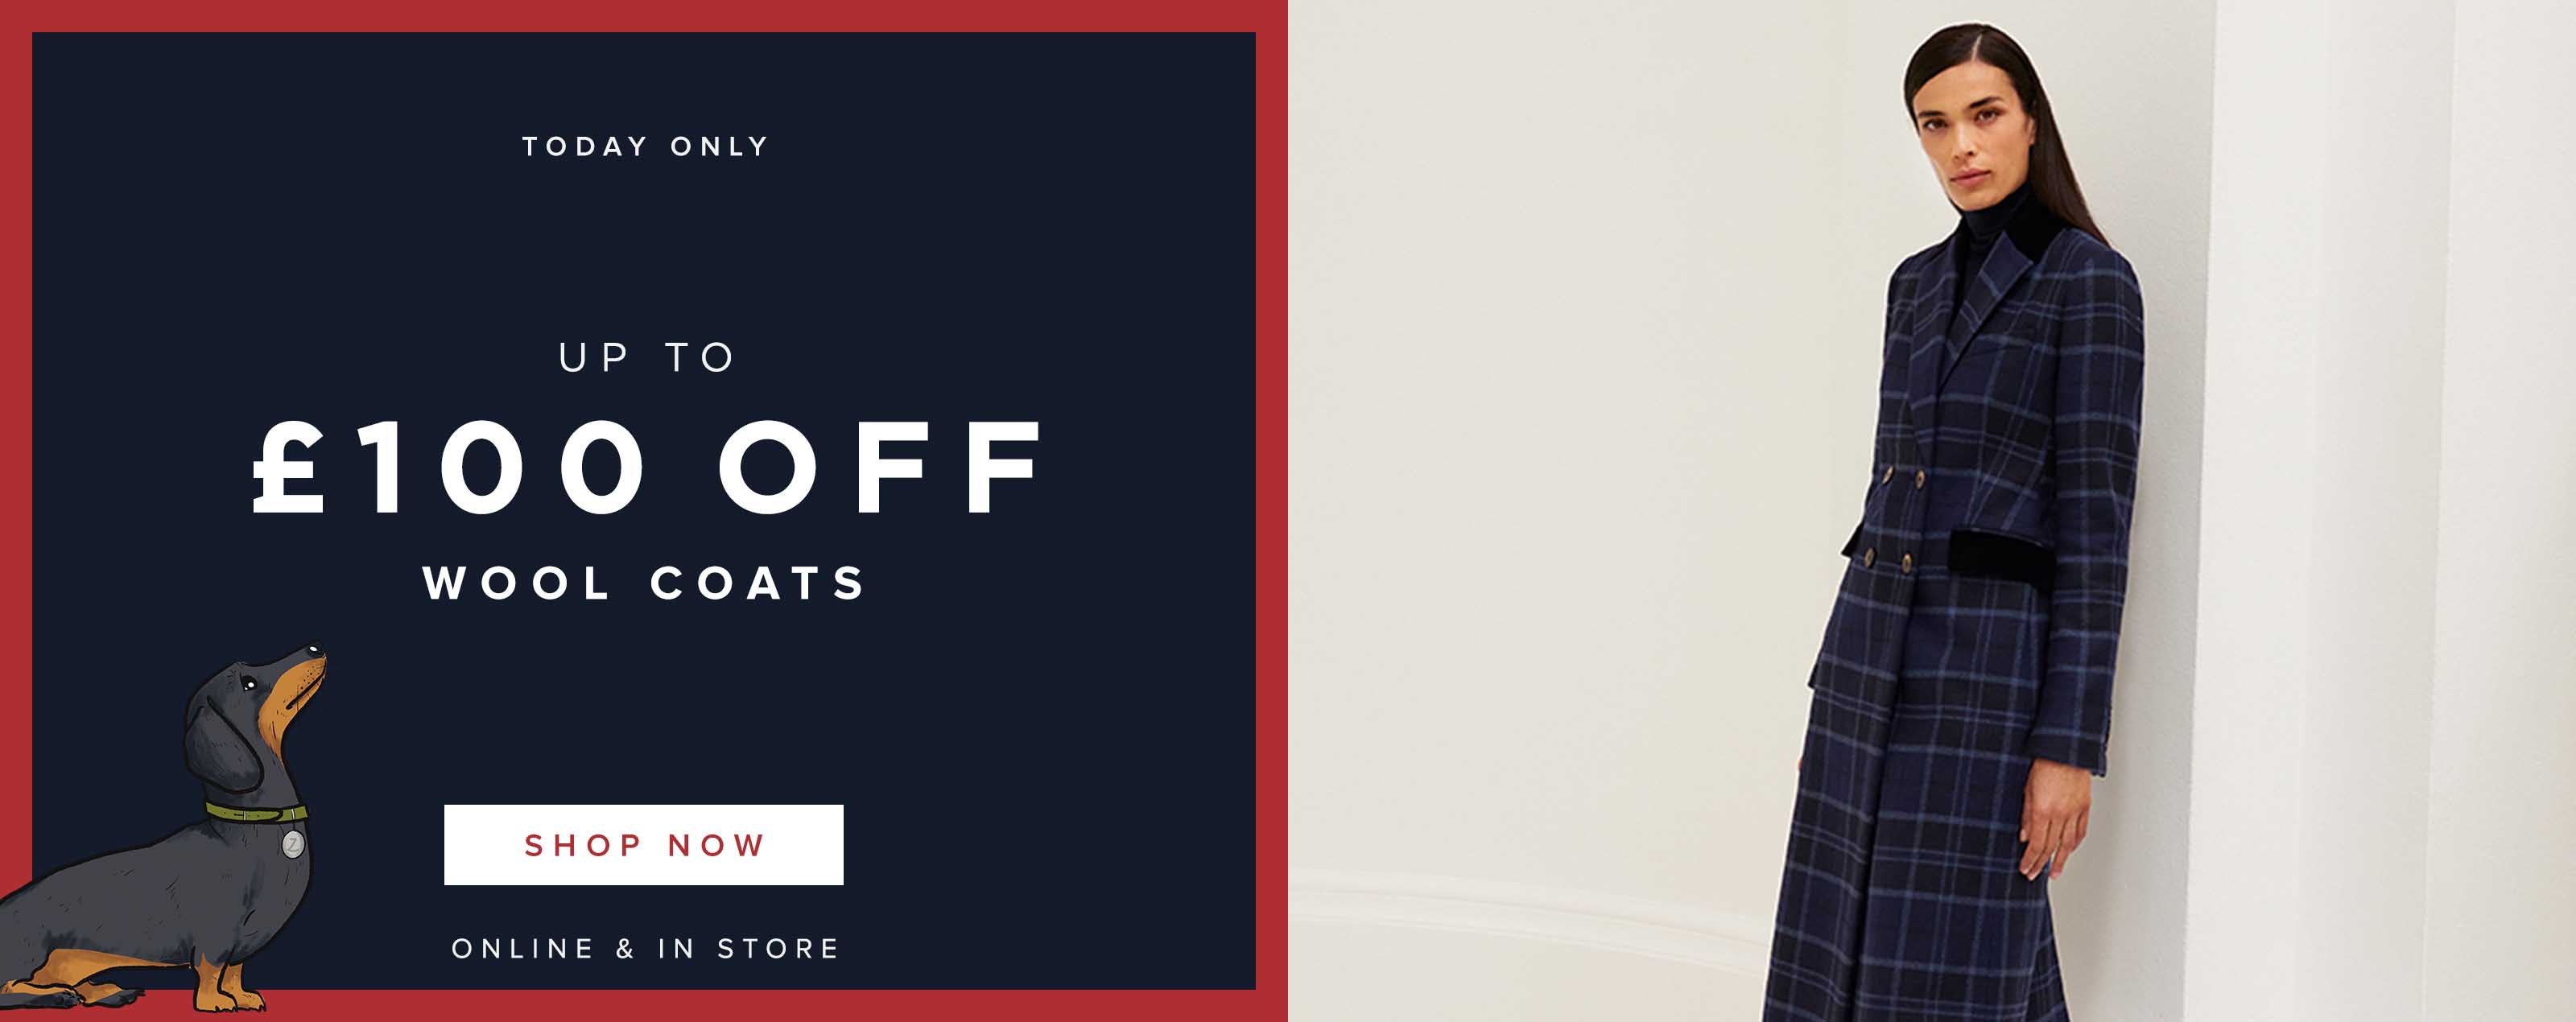 Hobbs Black Friday Today Only Up To £100 Off Selected Wool Coats Shop Now